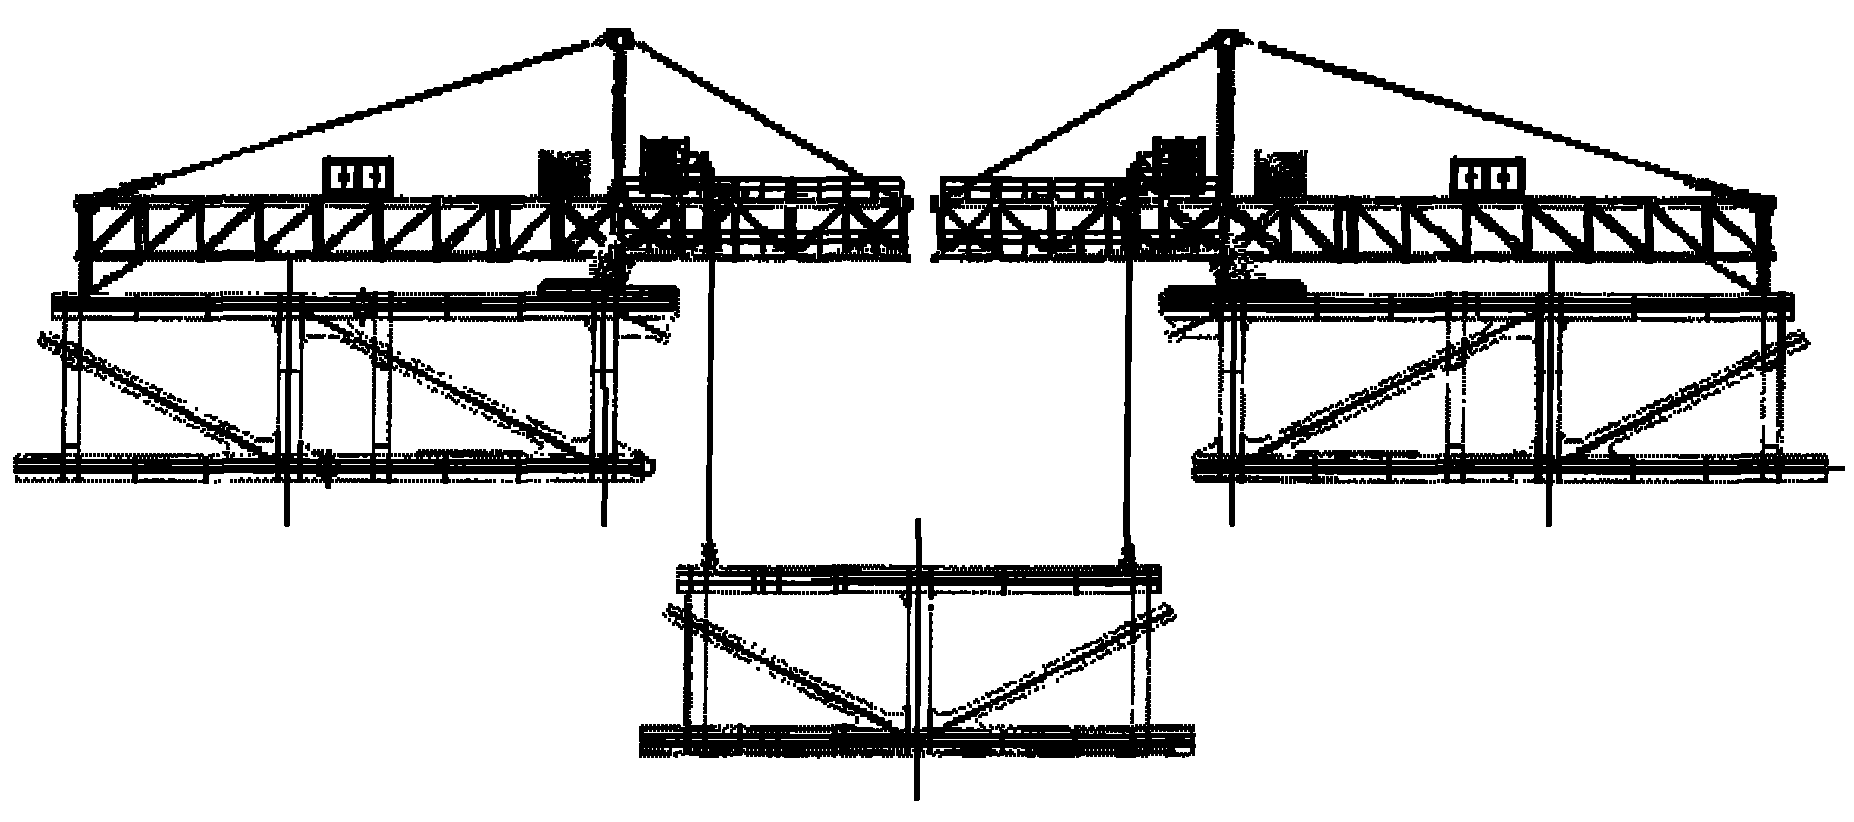 Integral welding closure method for large orthotropically combined steel truss bridge